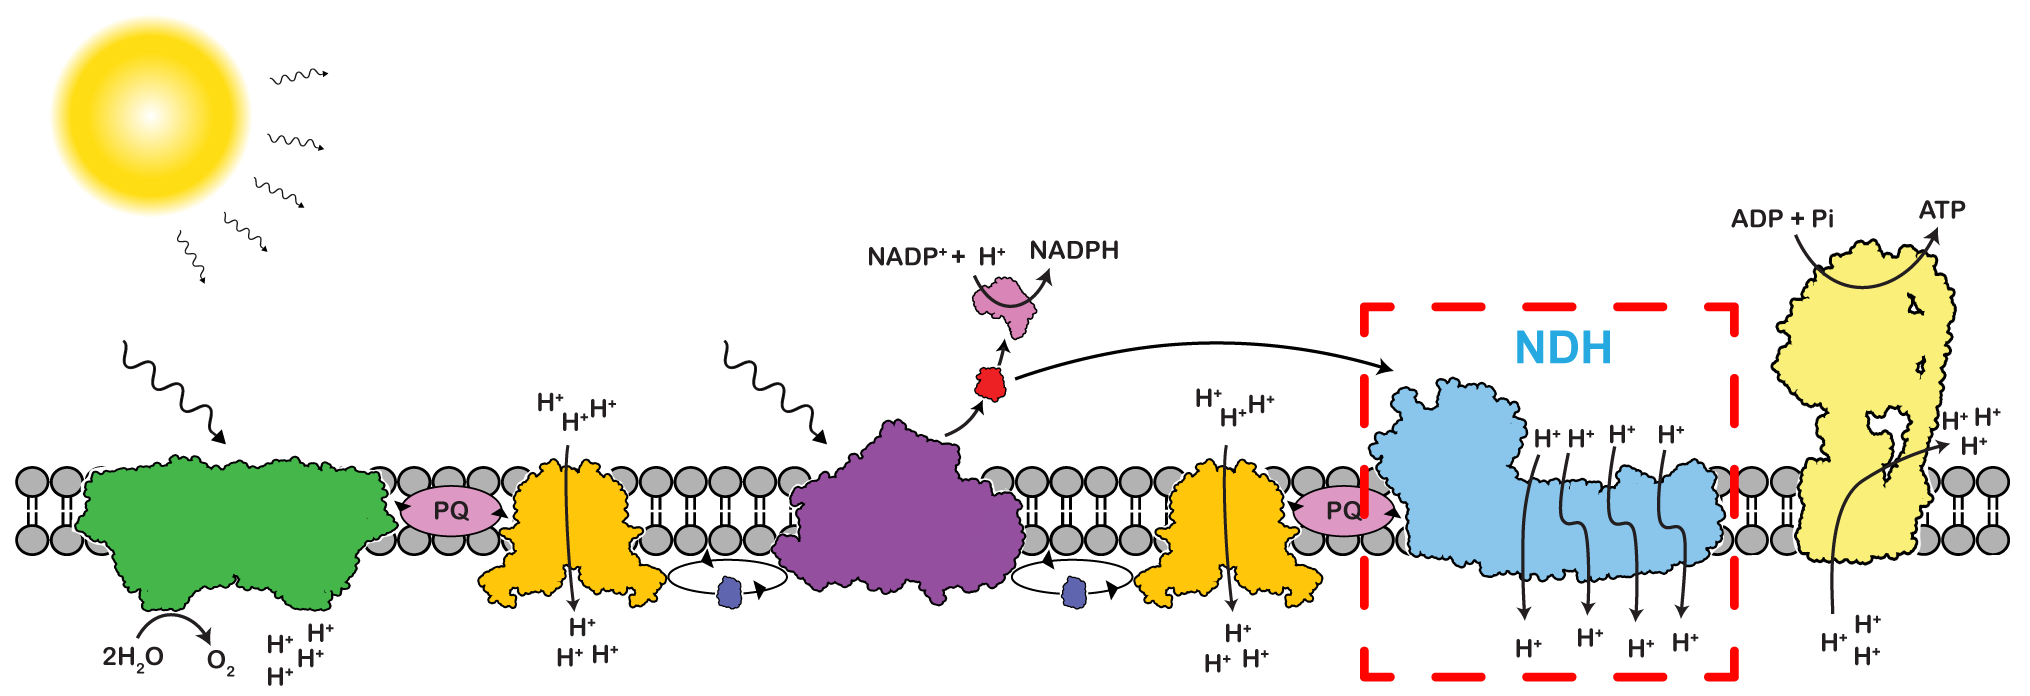 Illustration - Cartoon schematic of electron transport chain of photosynthesis in which energy from sunlight creates high-energy electrons that are shuttle among various protein complexes. The electron shuttling process is coupled with proton pumps that power ATP formation by ATP synthase.  An electron can flow linearly to power NADPH formation or it can be cycled between photosystem I and NDH to boost ATP synthesis. (Credit: Thomas Laughlin/UC Berkeley and Berkeley Lab).